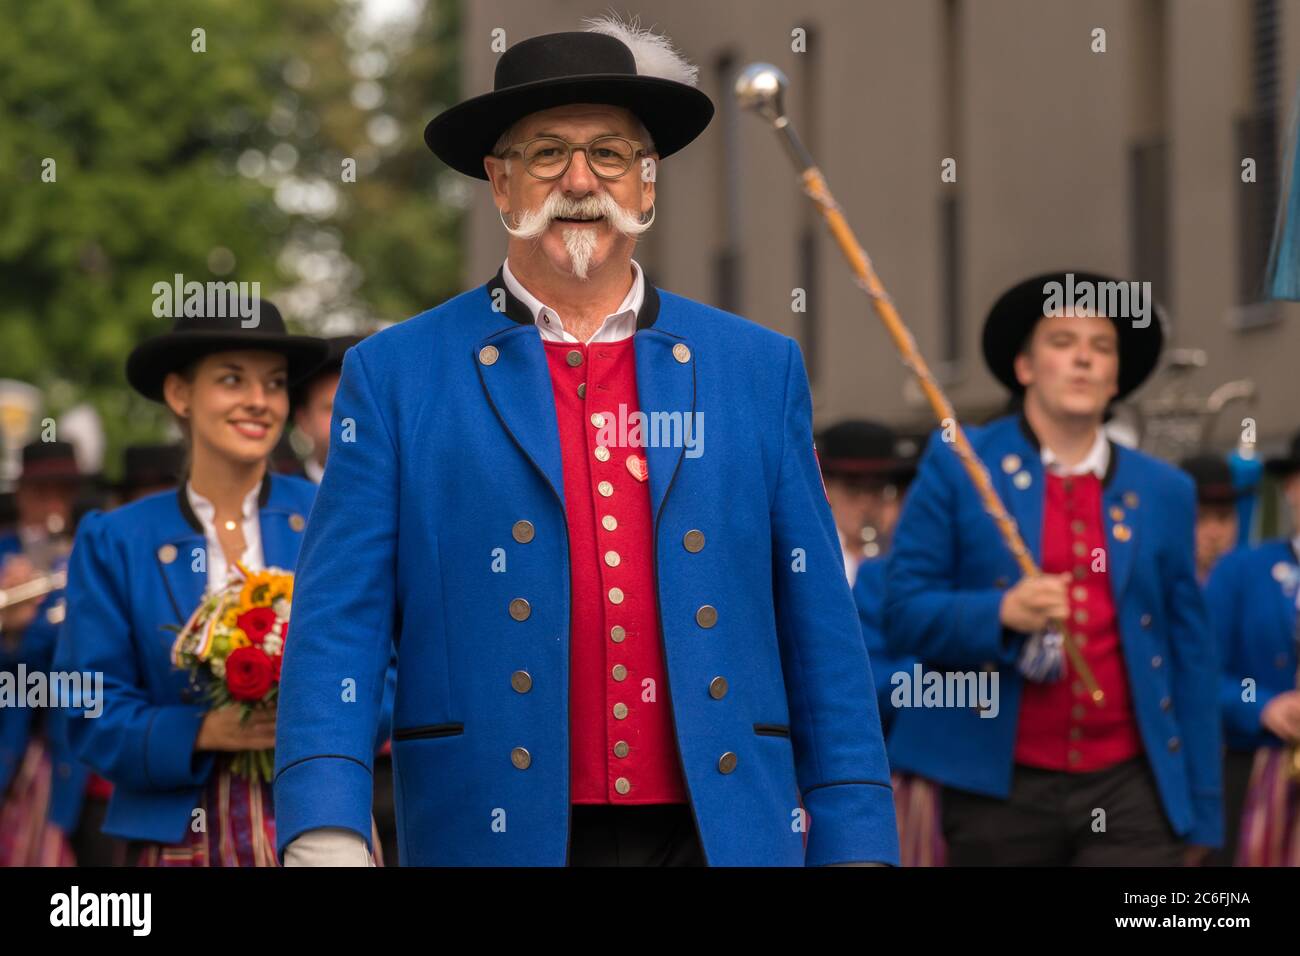 Villach, Austria - August 3th, 2019: Traditional-dressed man at the Villacher Kirchtag, the largest traditional festival in Austria Stock Photo